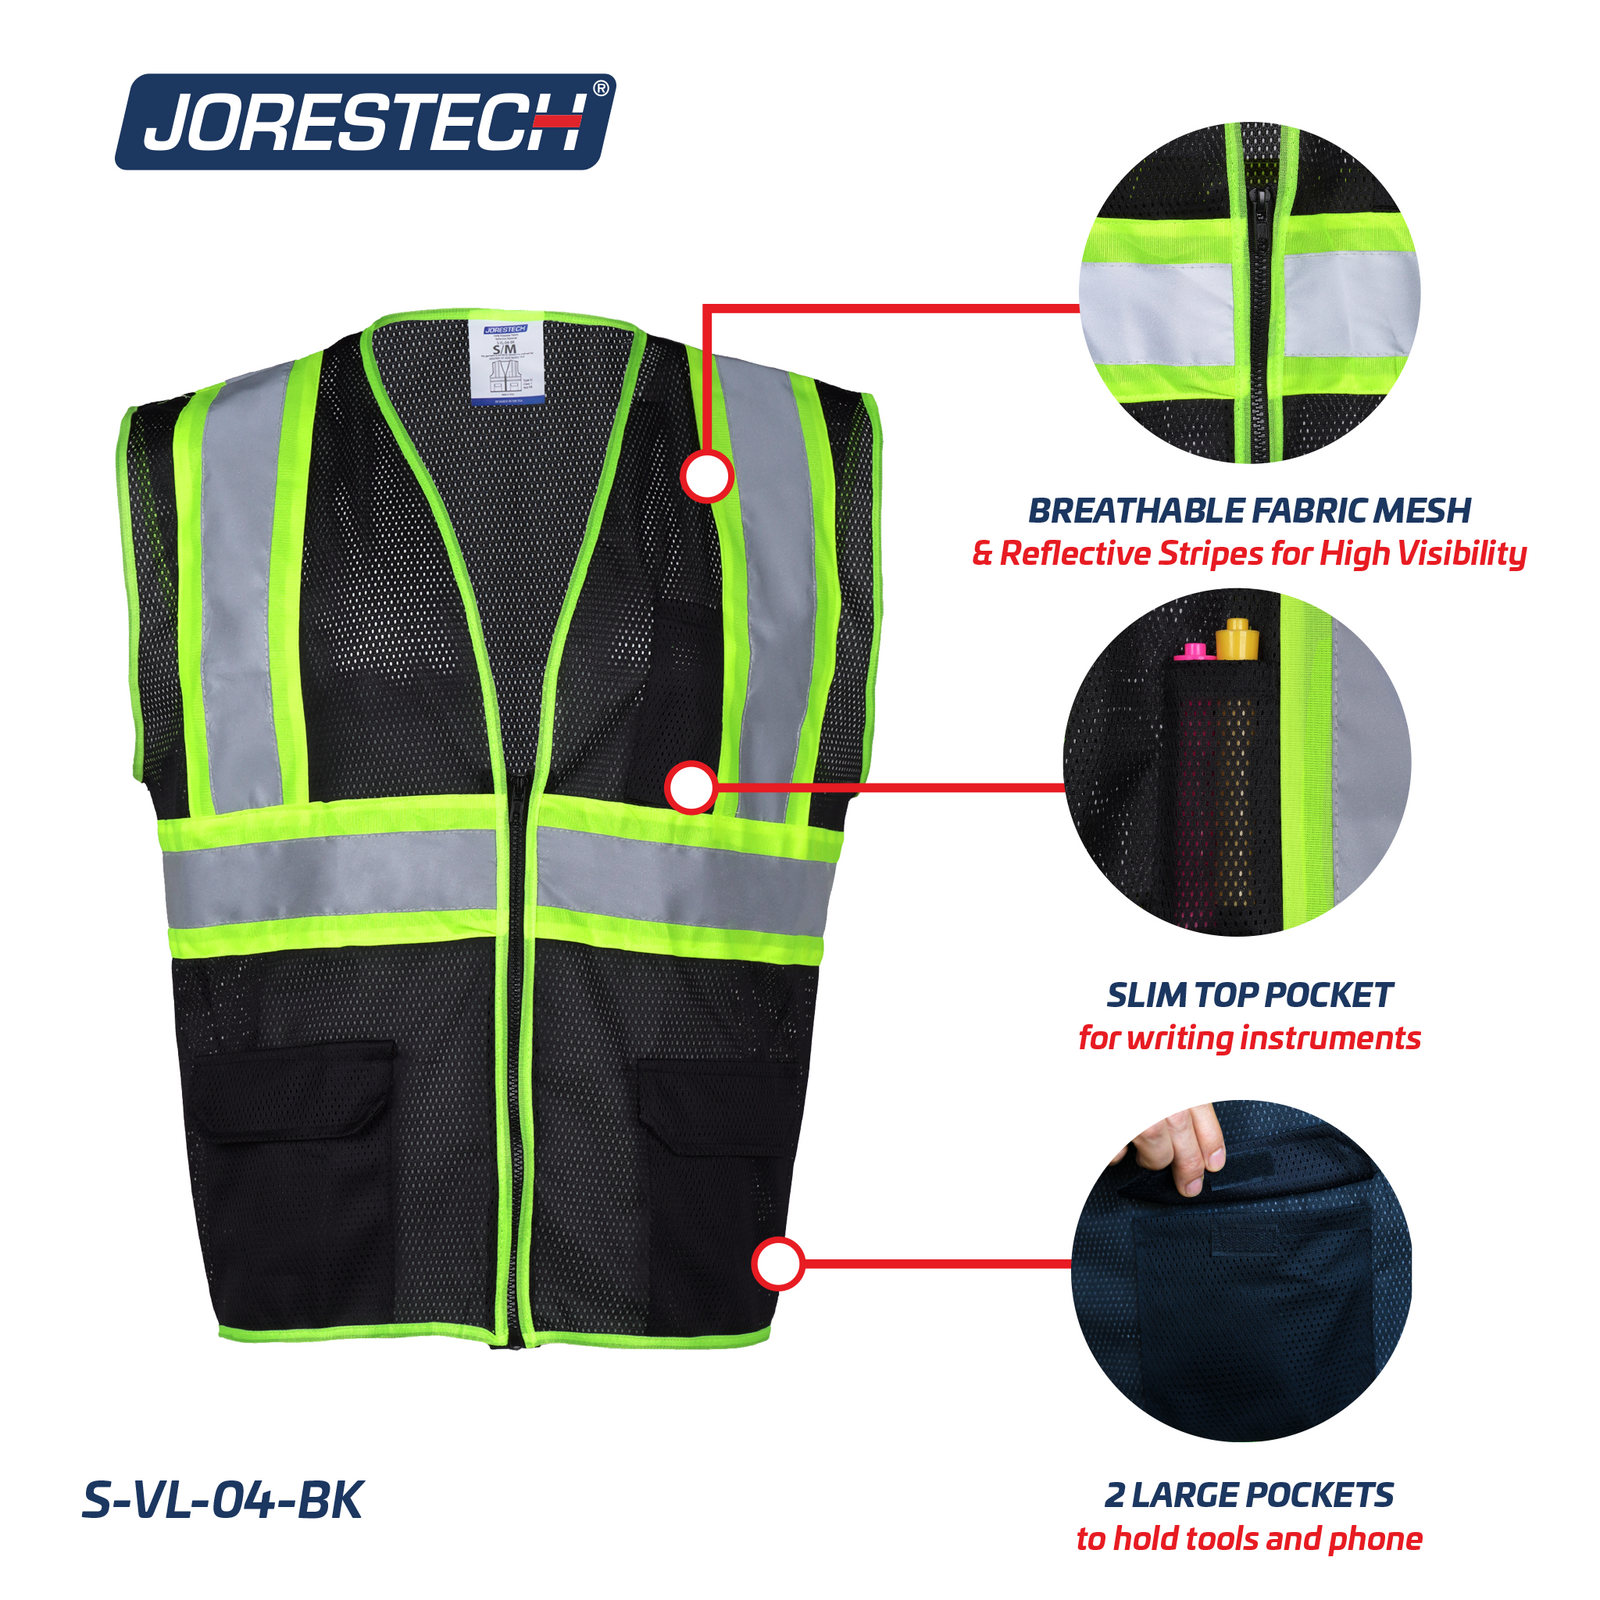 Features the Black safety vest with 3 call outs: one tool pocket, breathable fabric, two full size pockets at waist level